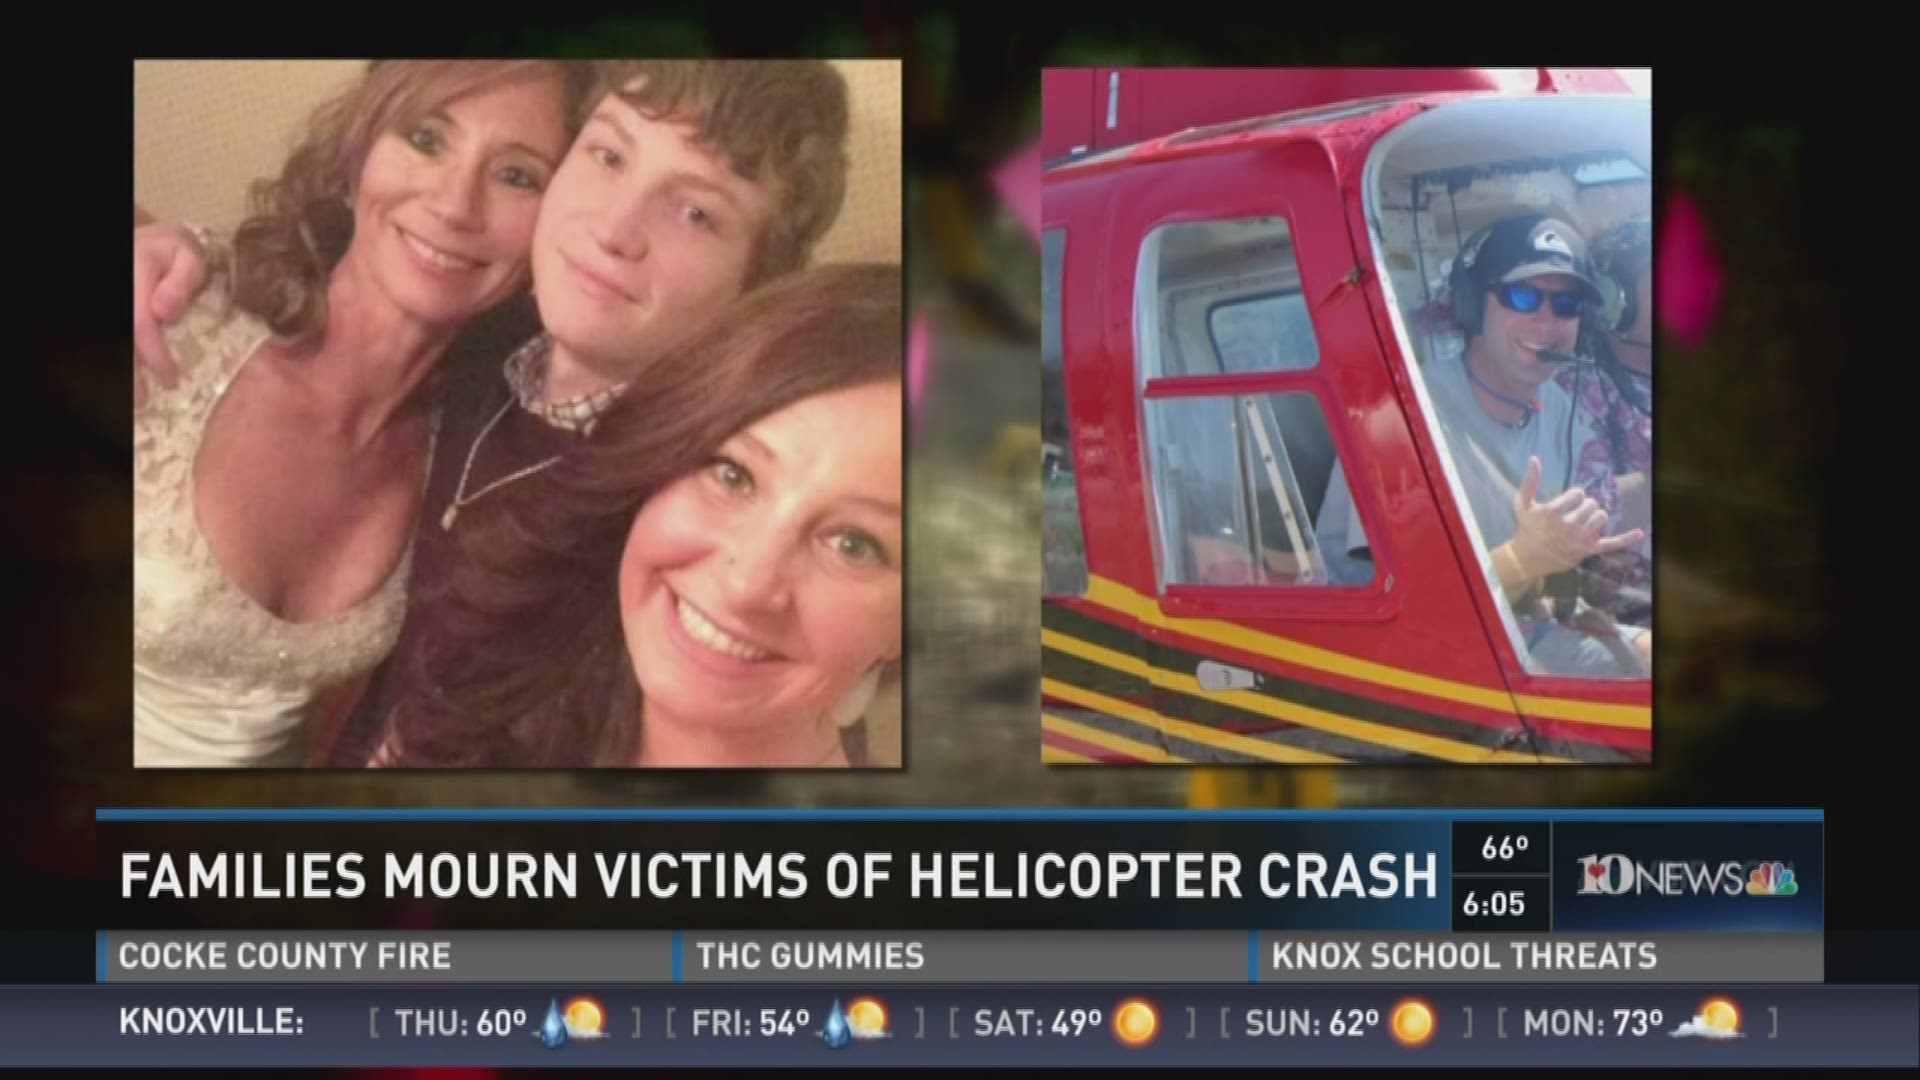 April 6, 2016 at 6p.m. 10News reporter Michael Crowe talked to people who knew the victims killed in a tragic helicopter crash in Pigeon Forge.